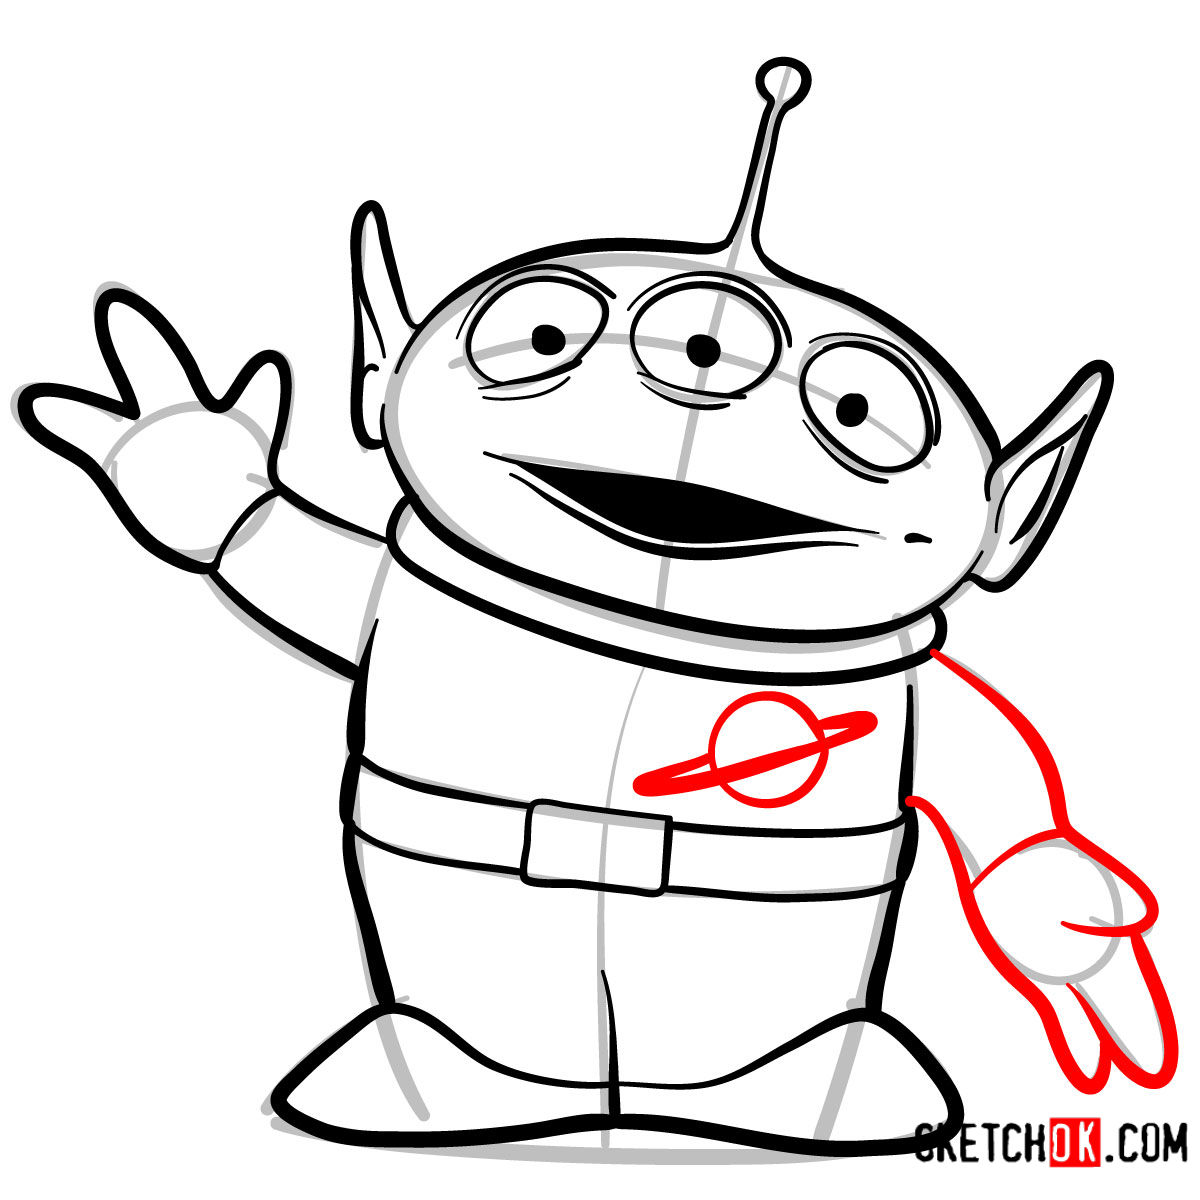 How to draw Alien Toy Story - step 08.